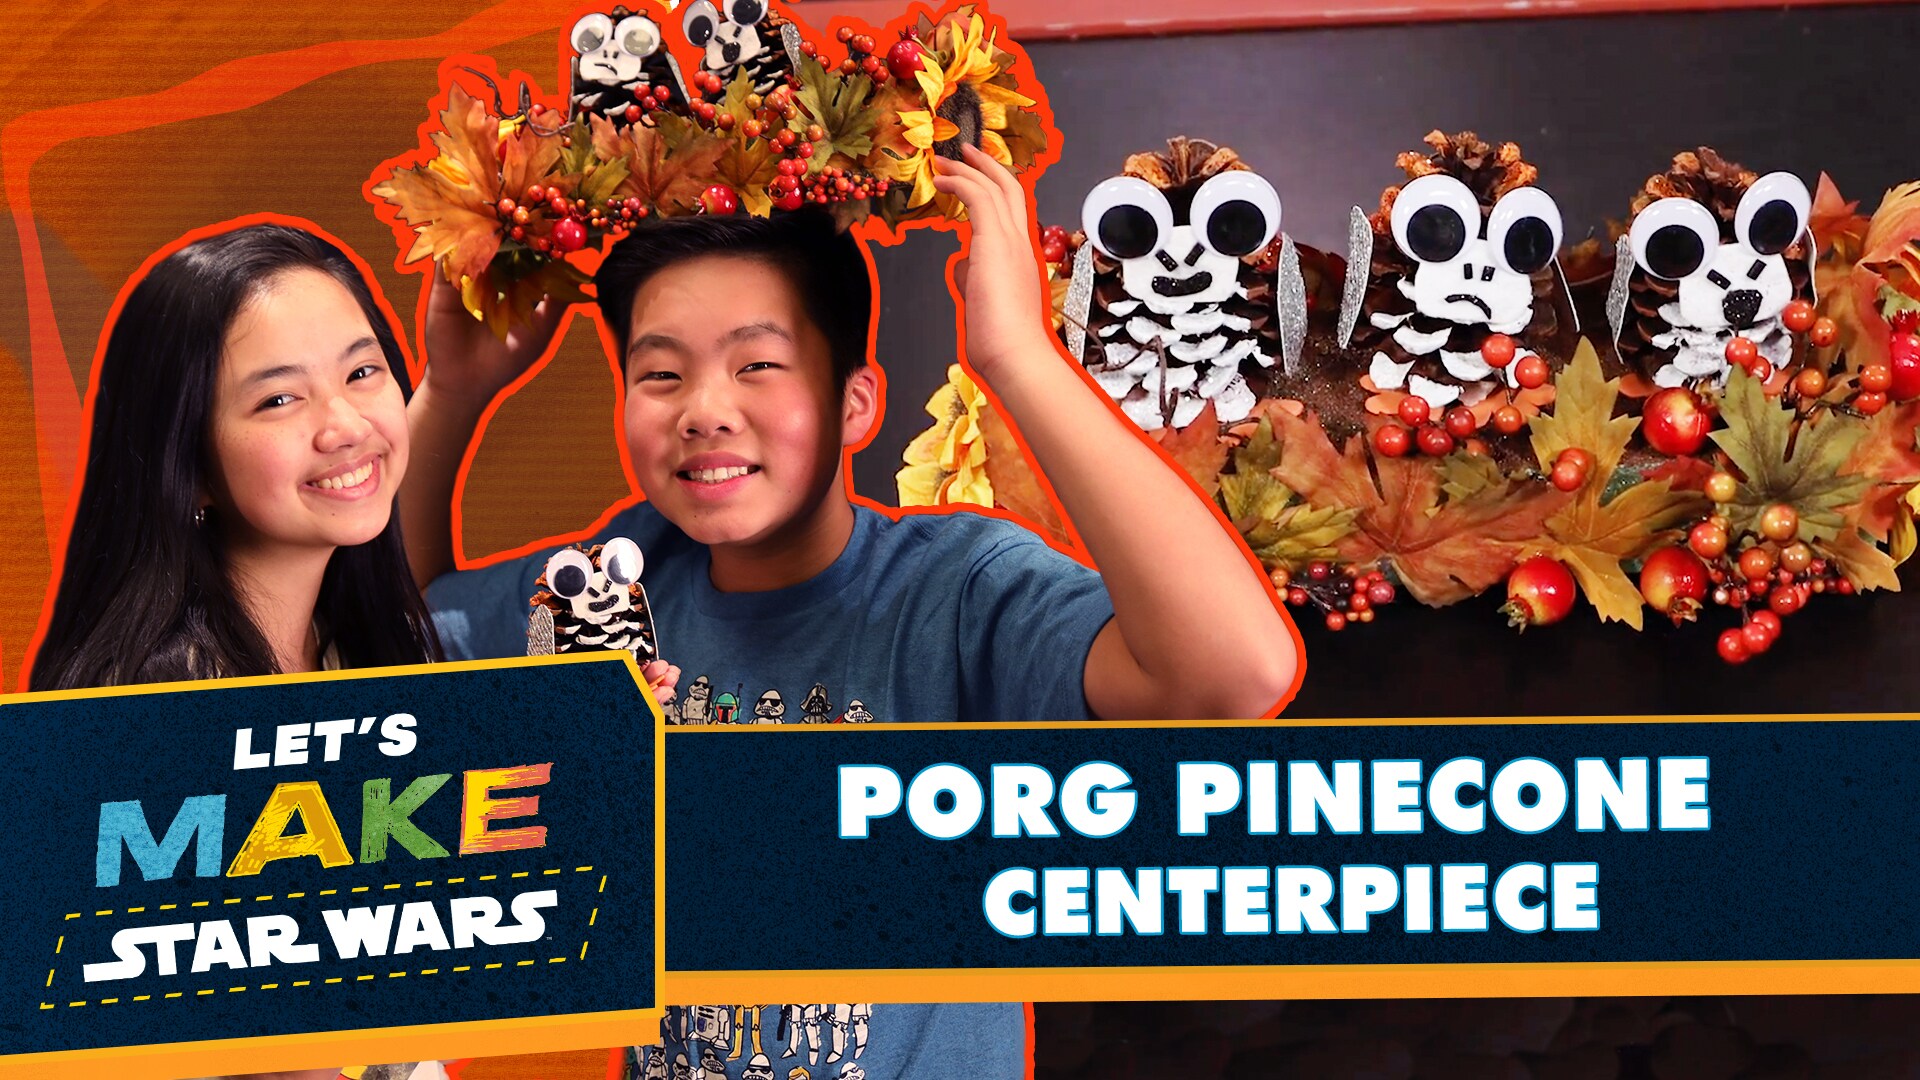 How to Make a Porg Pinecone Centerpiece | Let's Make Star Wars